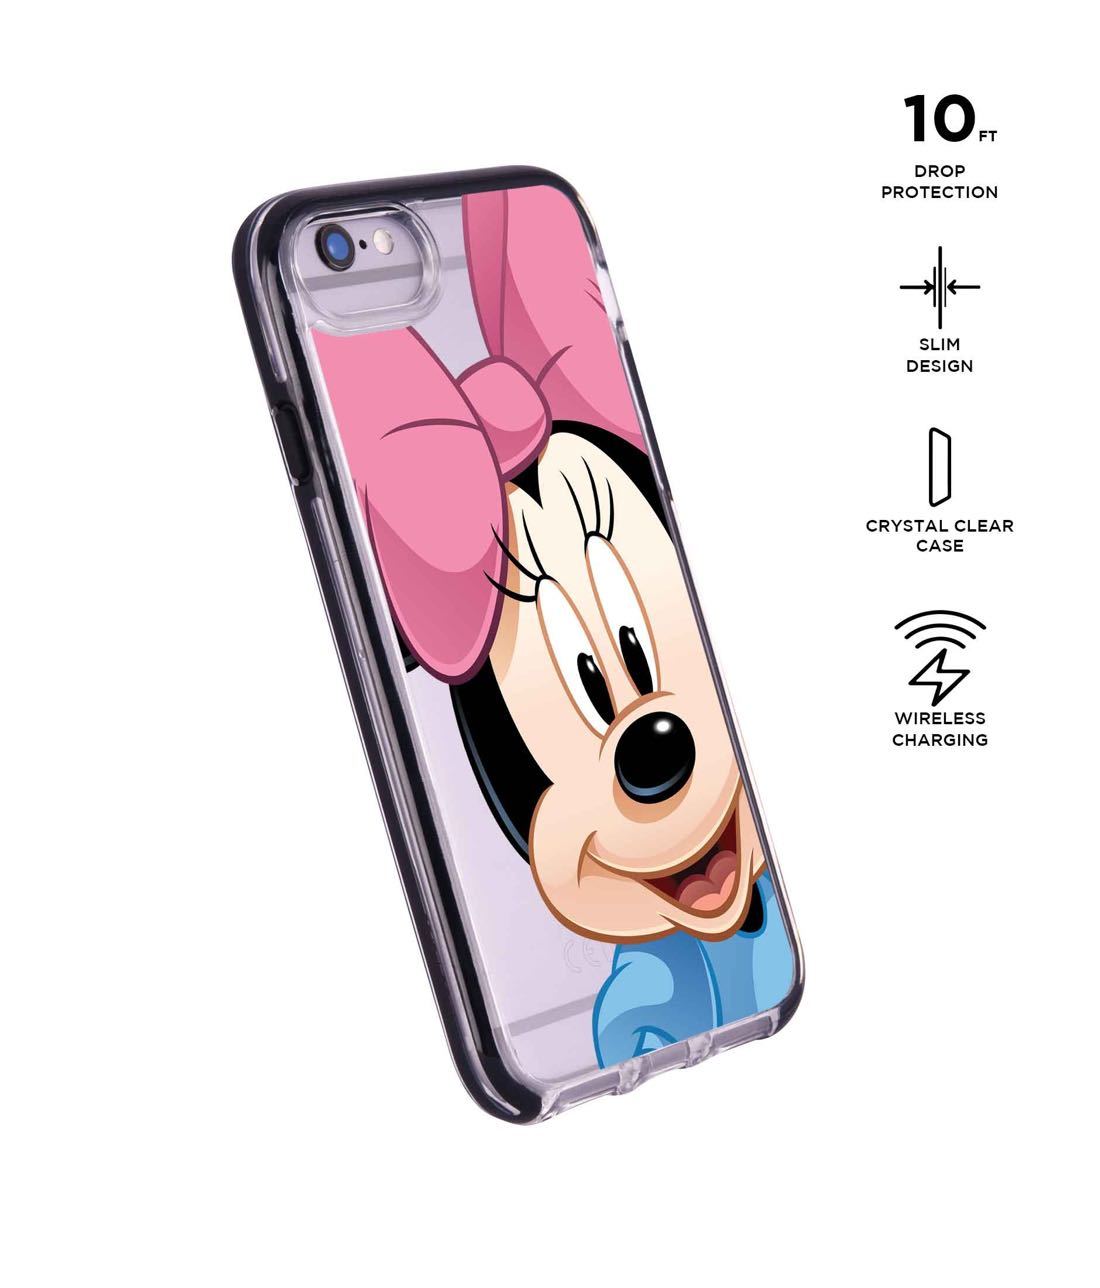 Zoom Up Minnie - Extreme Phone Case for iPhone 6S